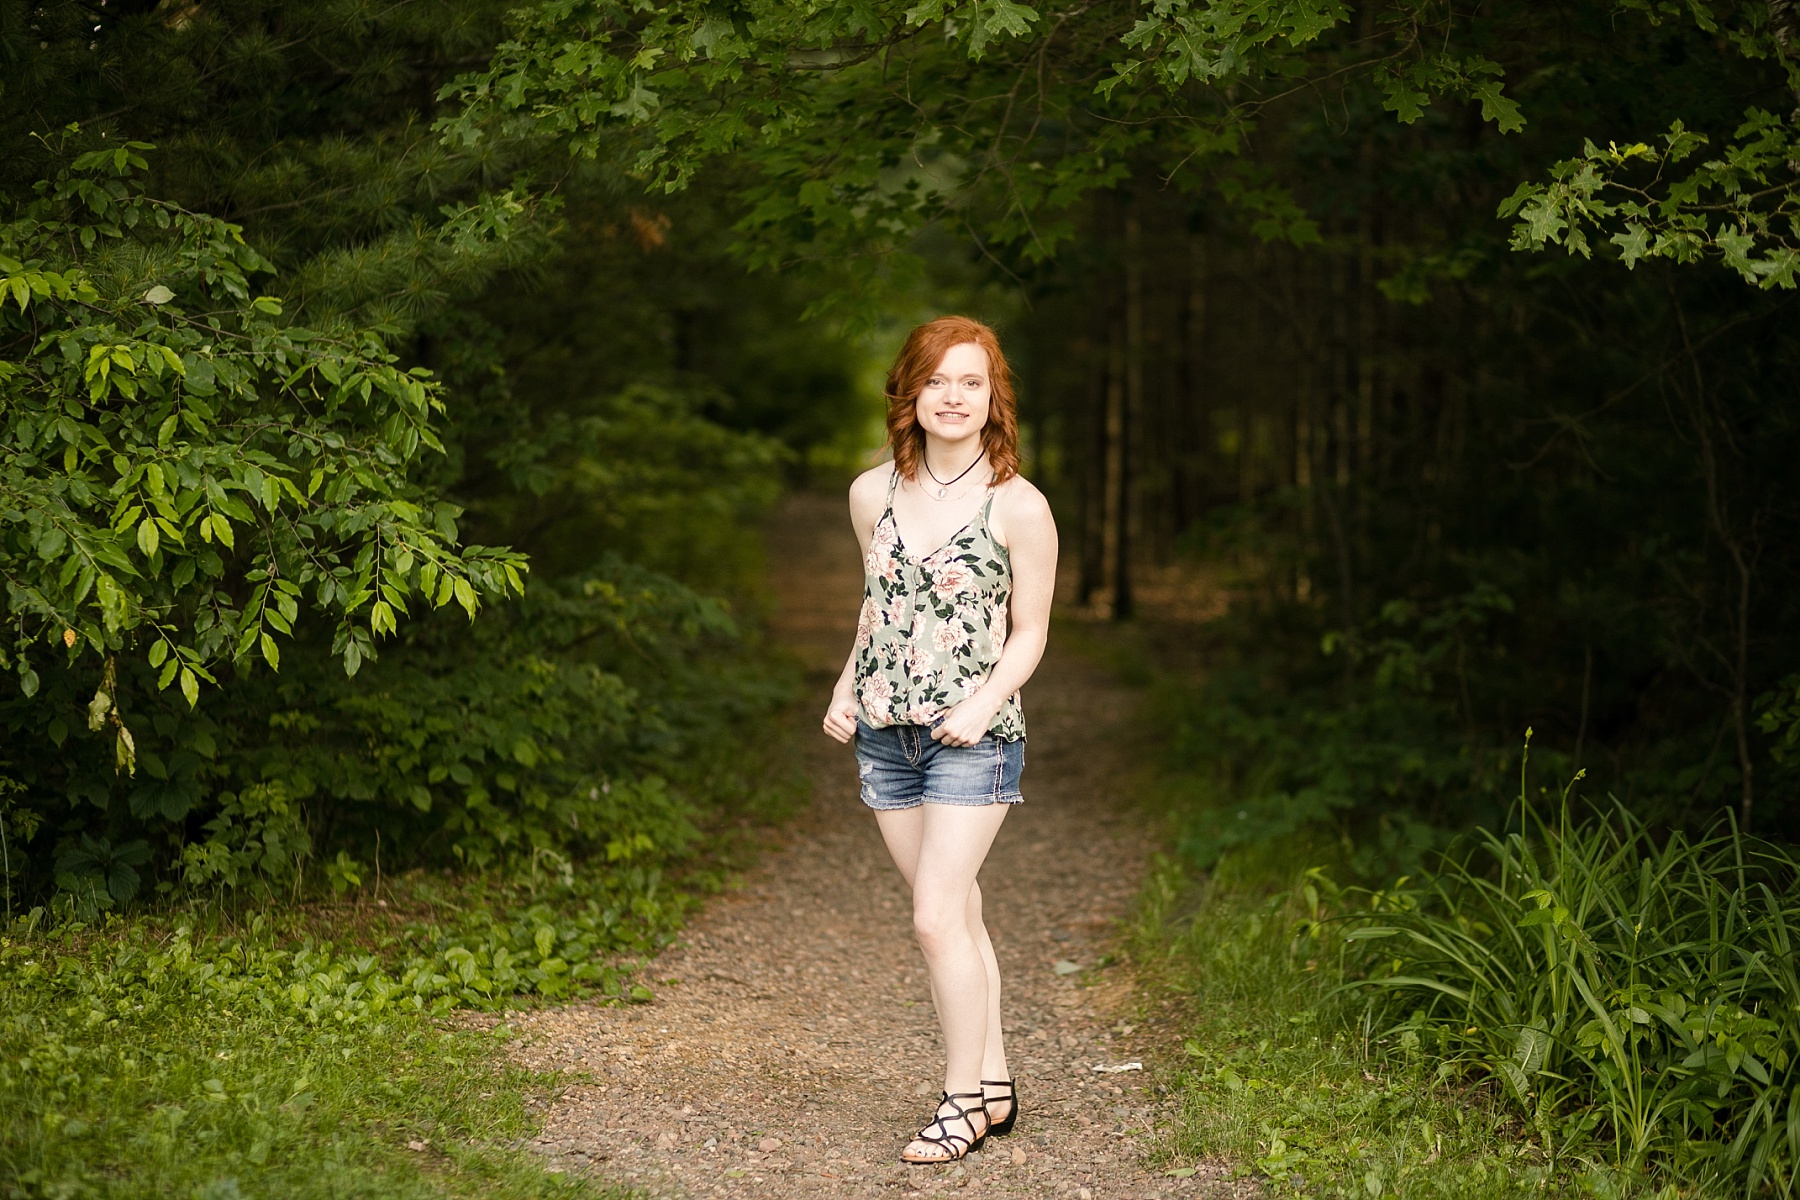 A little bit of sunshine and fields of flowers were perfect for Marissa's Lake Wissota State Park senior photos.